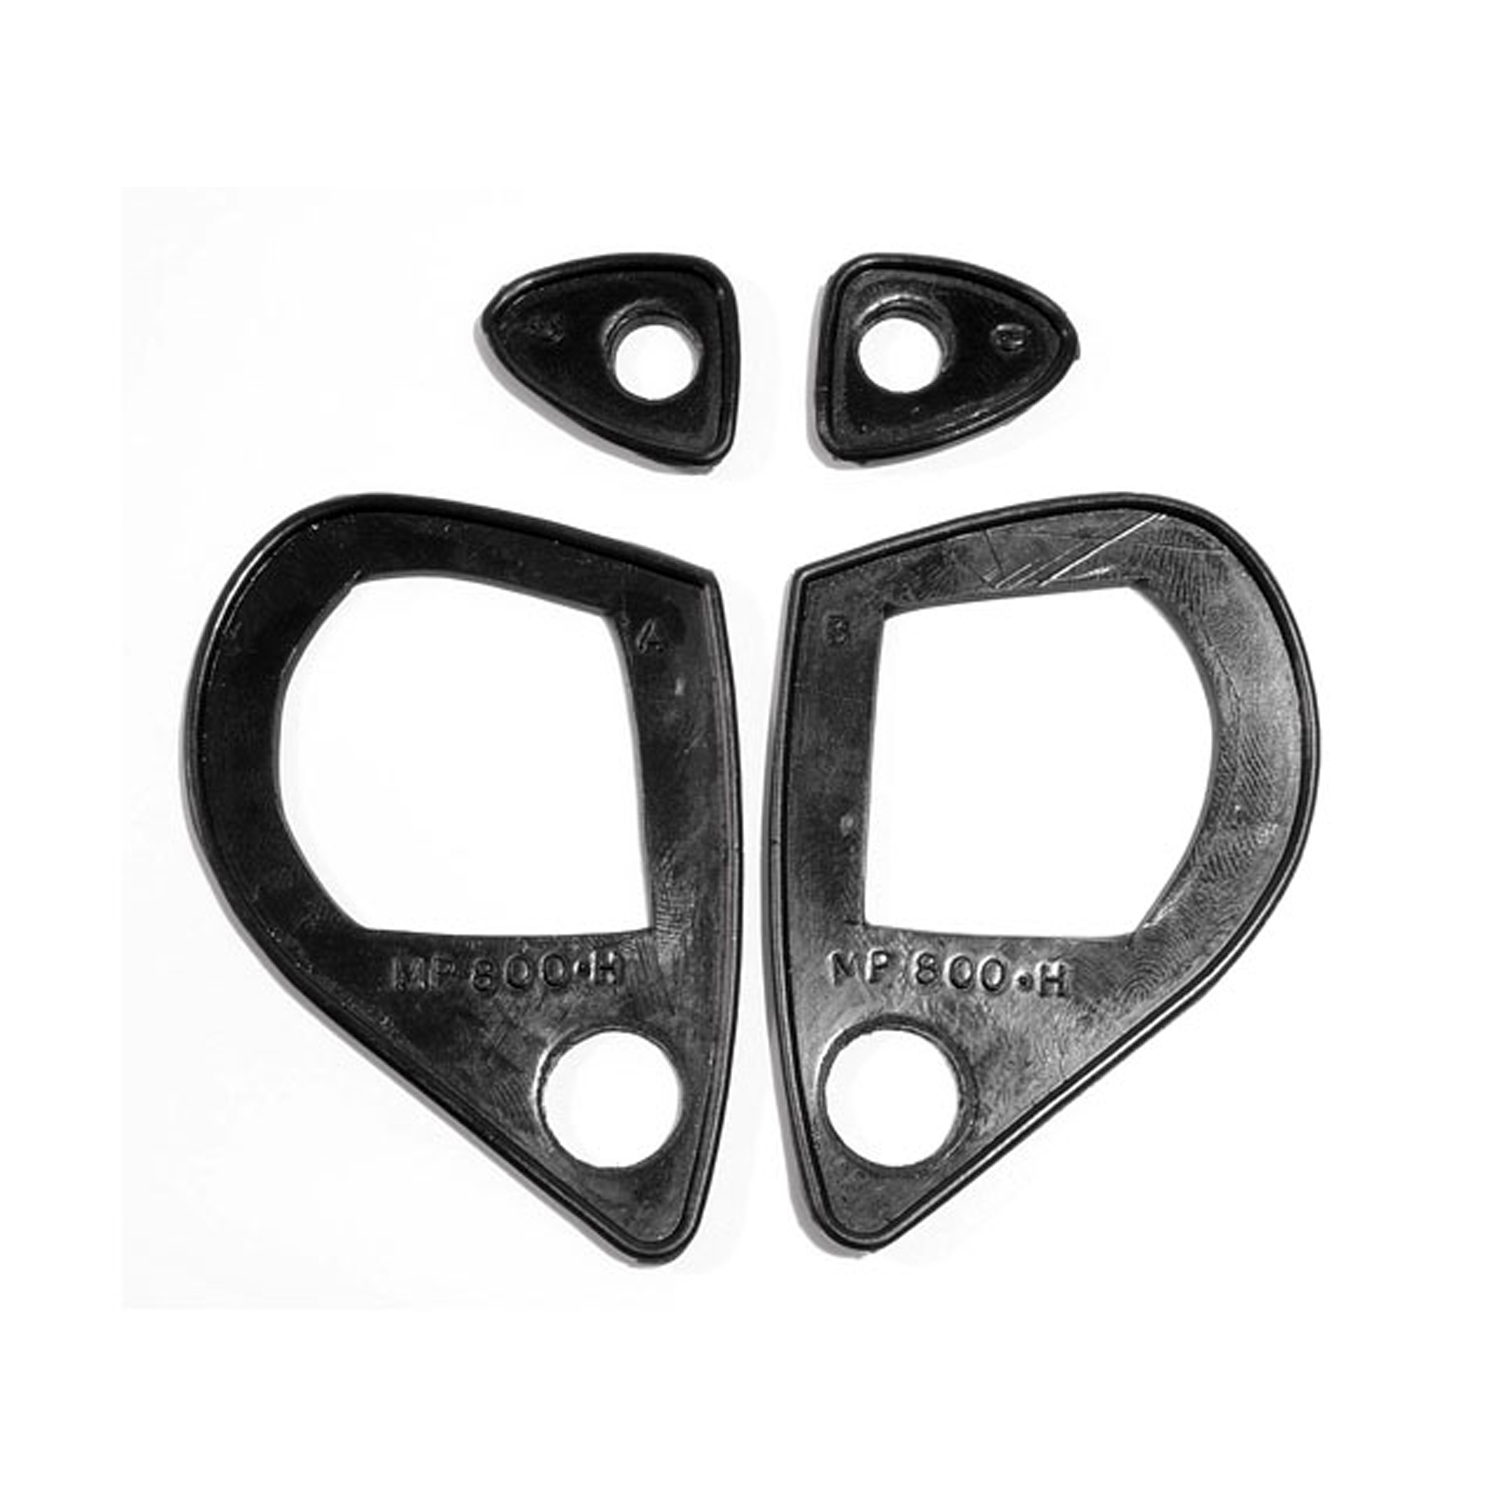 1963 Ford Club Wagon Door Handle Pads.  Replaces OEM #C34Z6222428A-9A-MP 800-H